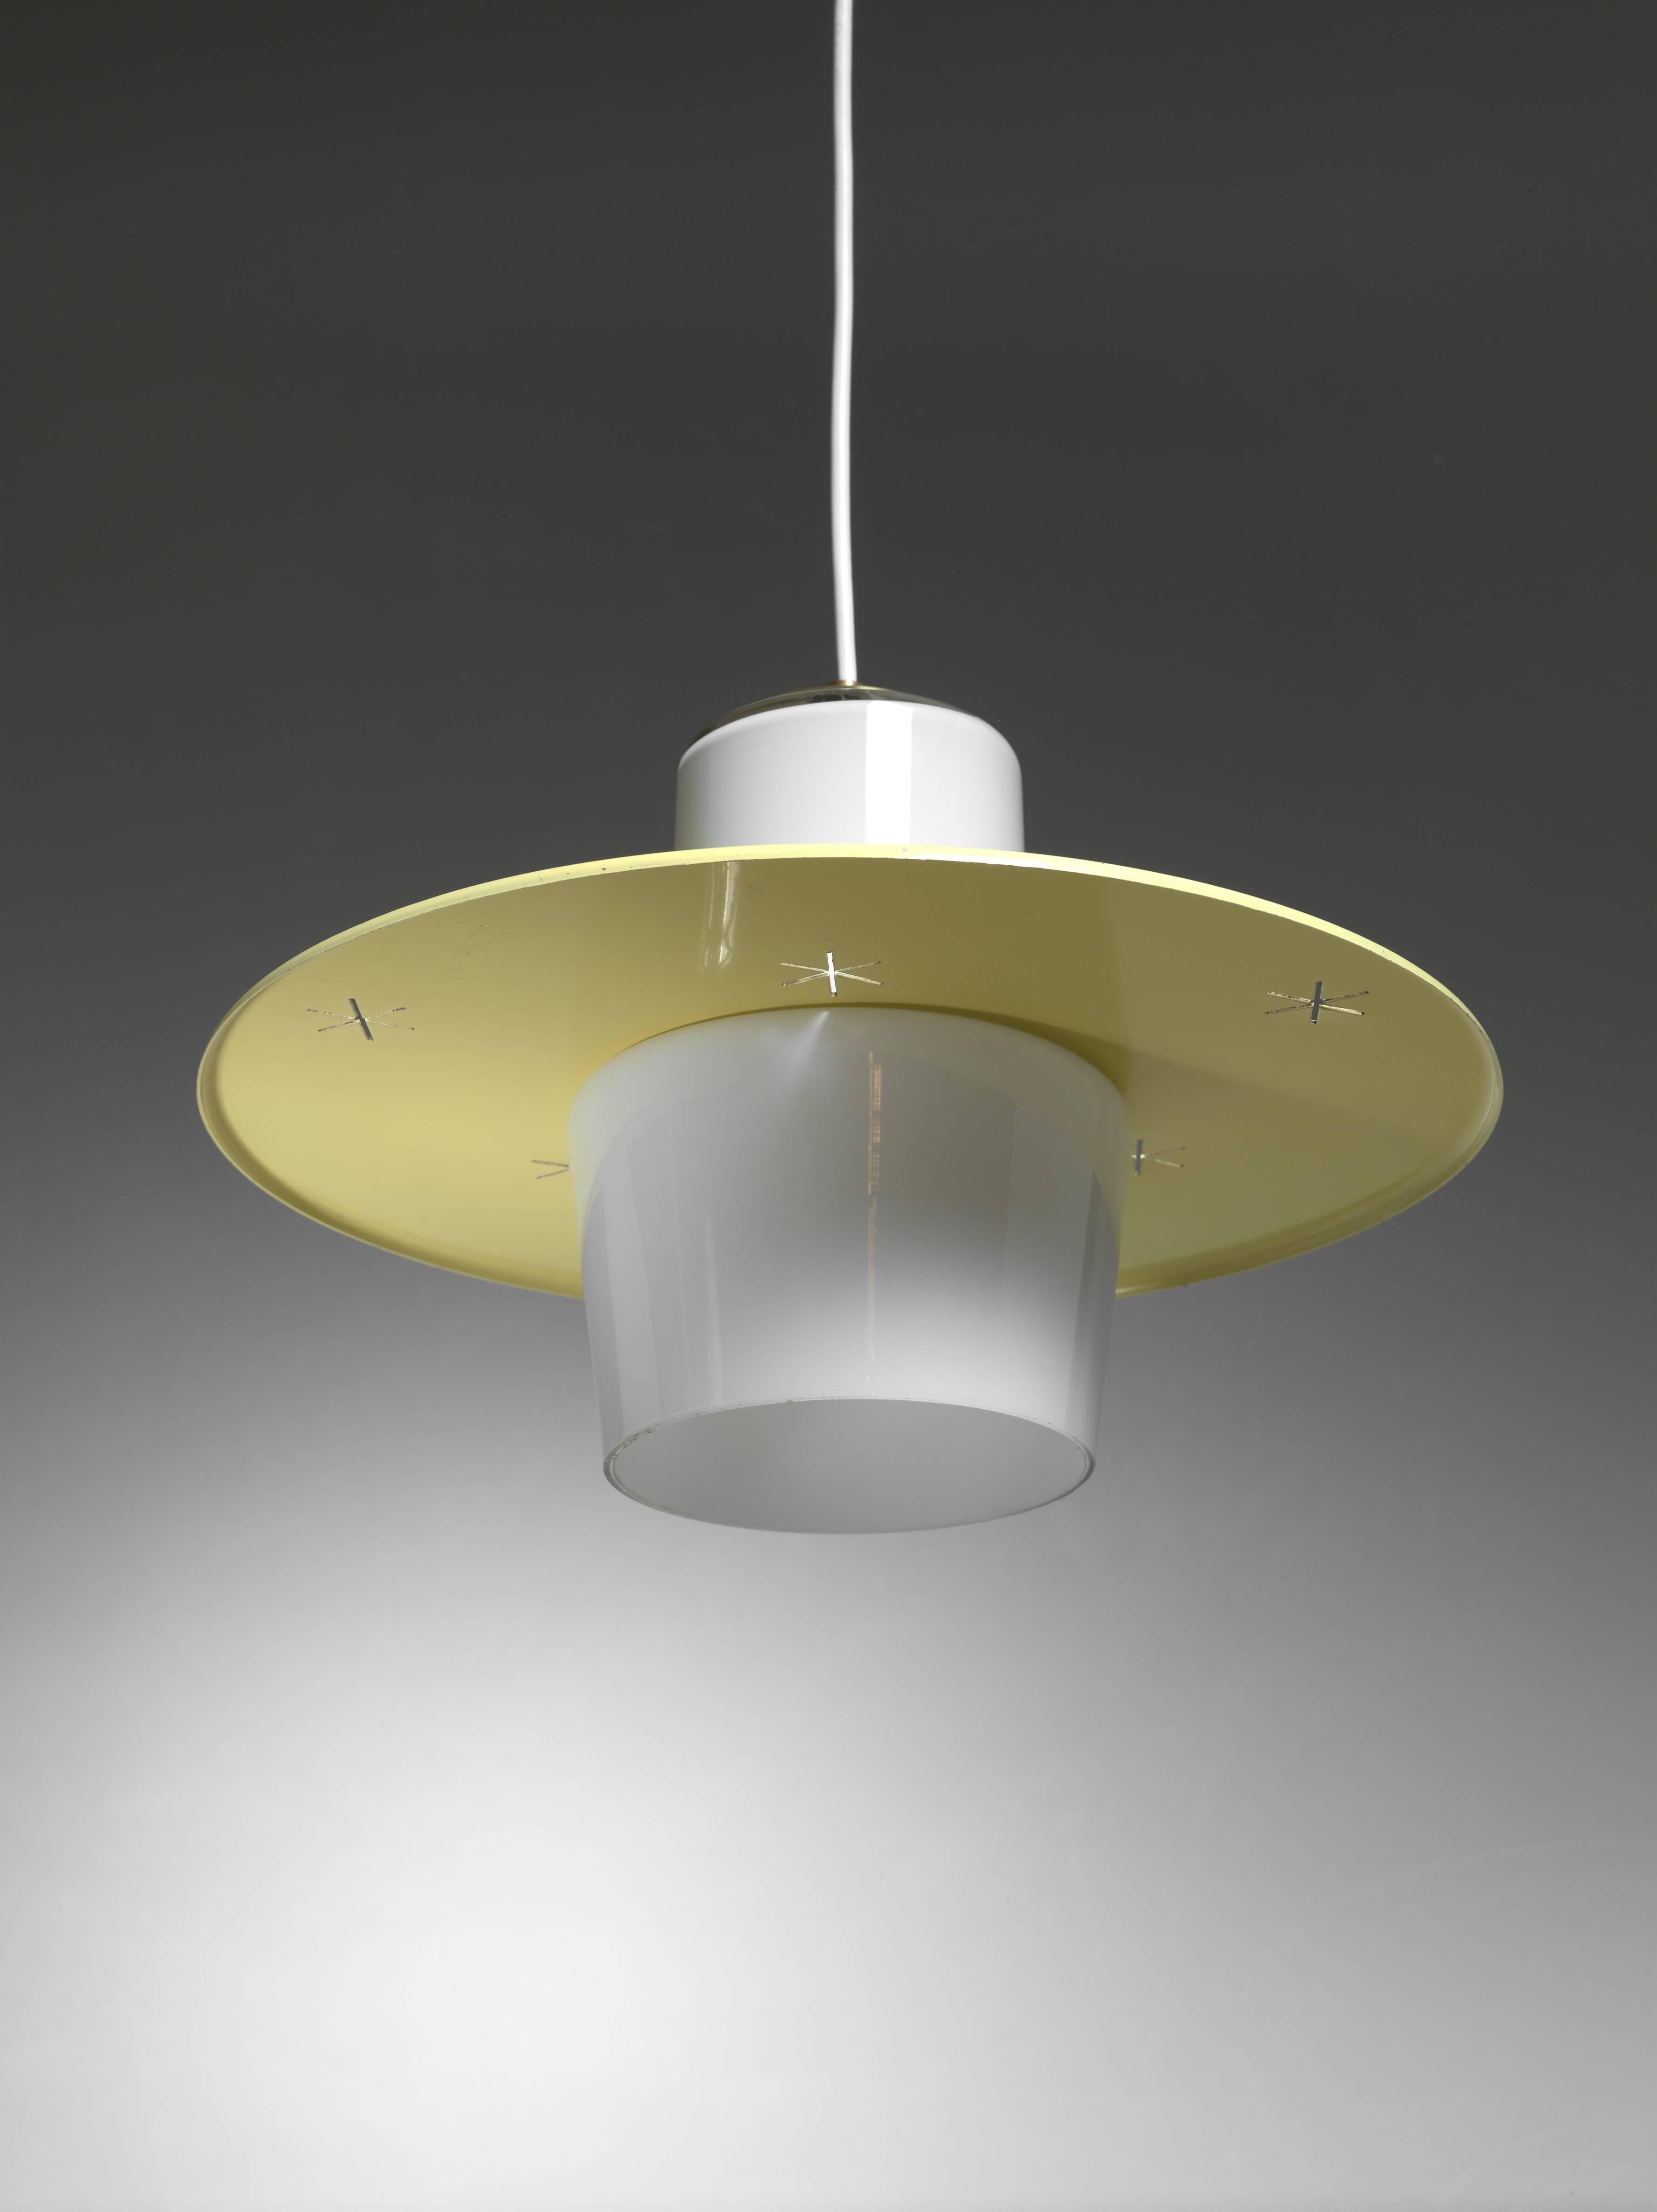 A model K2-23 pendant by Paavo Tynell. The lamp is made of a opaline glass diffuser with a round yellow metal shade with large star-shaped perforations. The lamp is marked by Idman and in an excellent condition.

Total drop can be adjusted to your